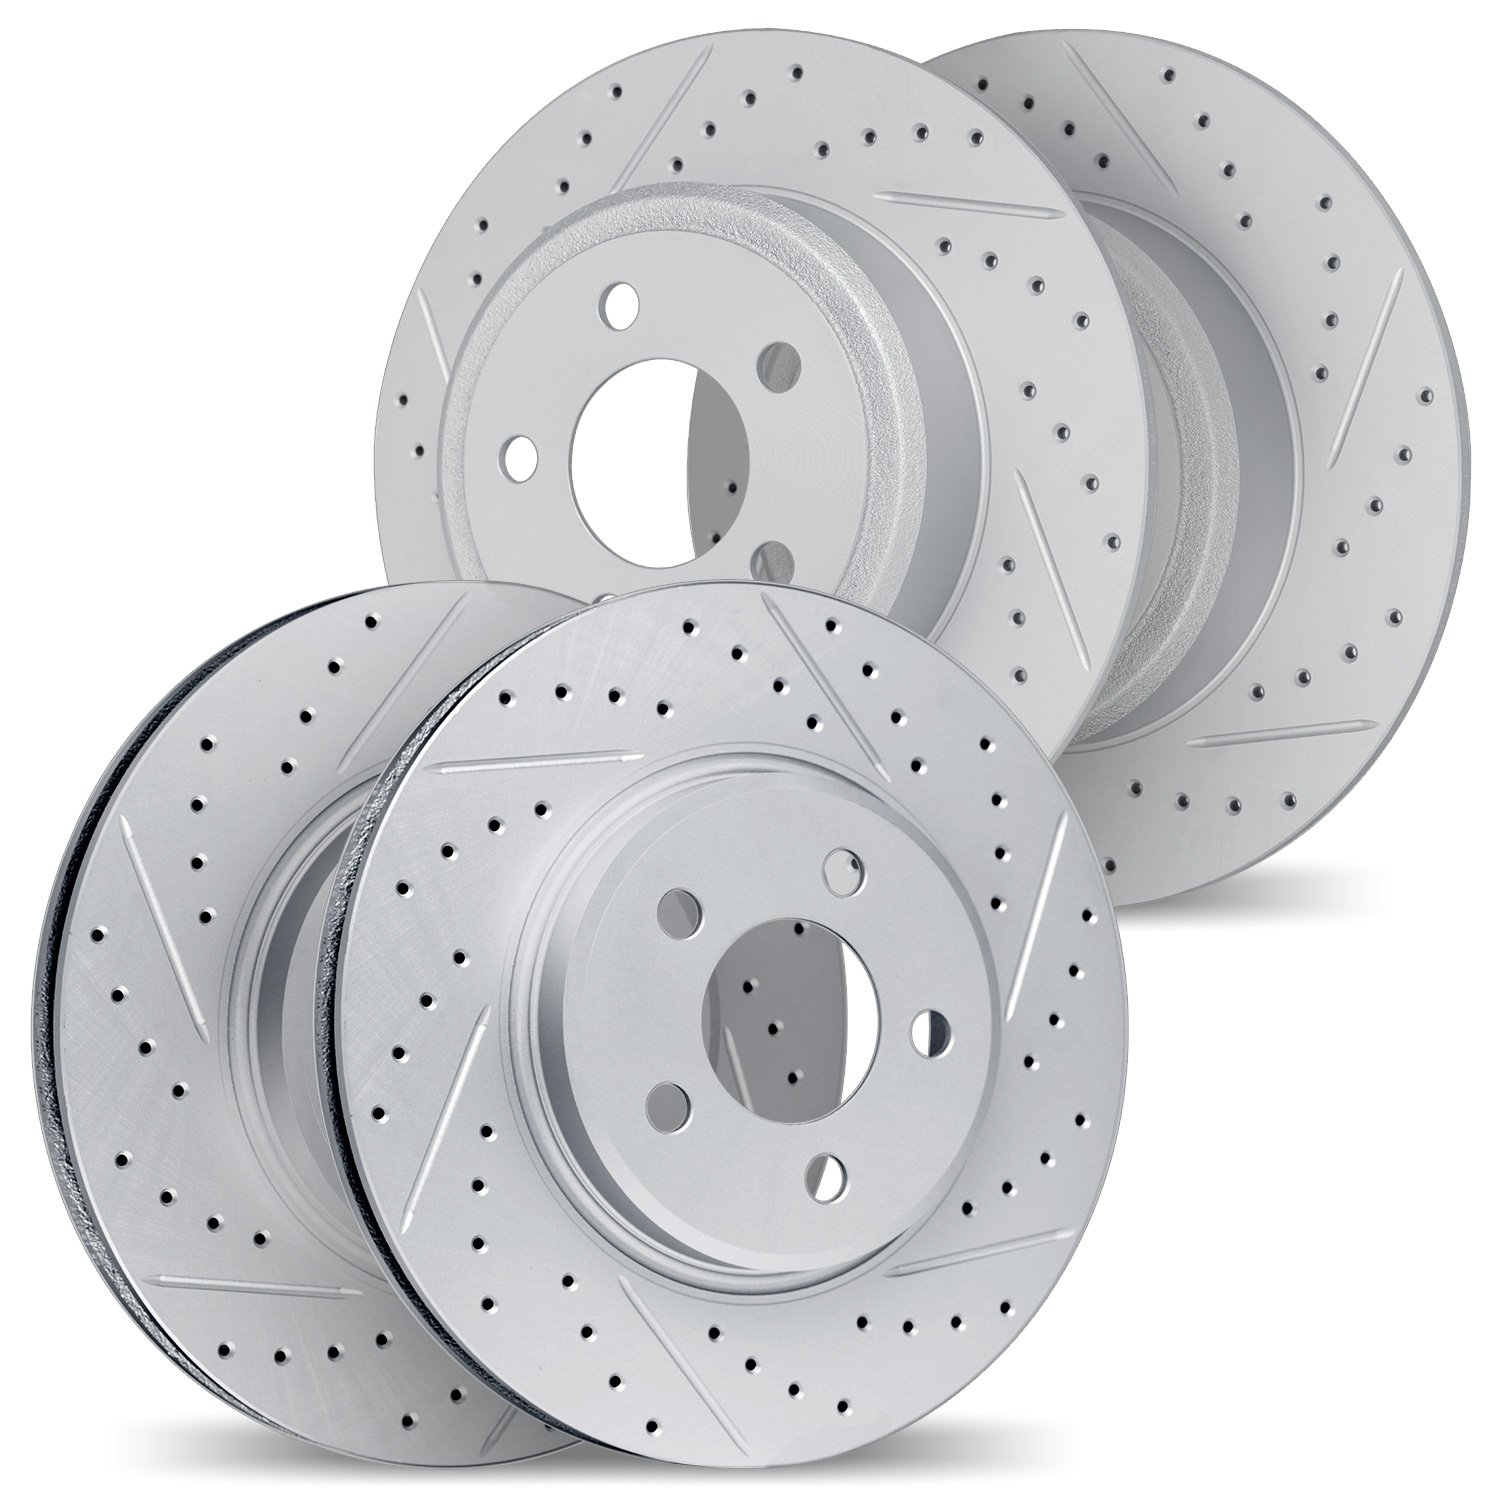 2004-58012 Geoperformance Drilled/Slotted Brake Rotors, 2004-2008 Acura/Honda, Position: Front and Rear